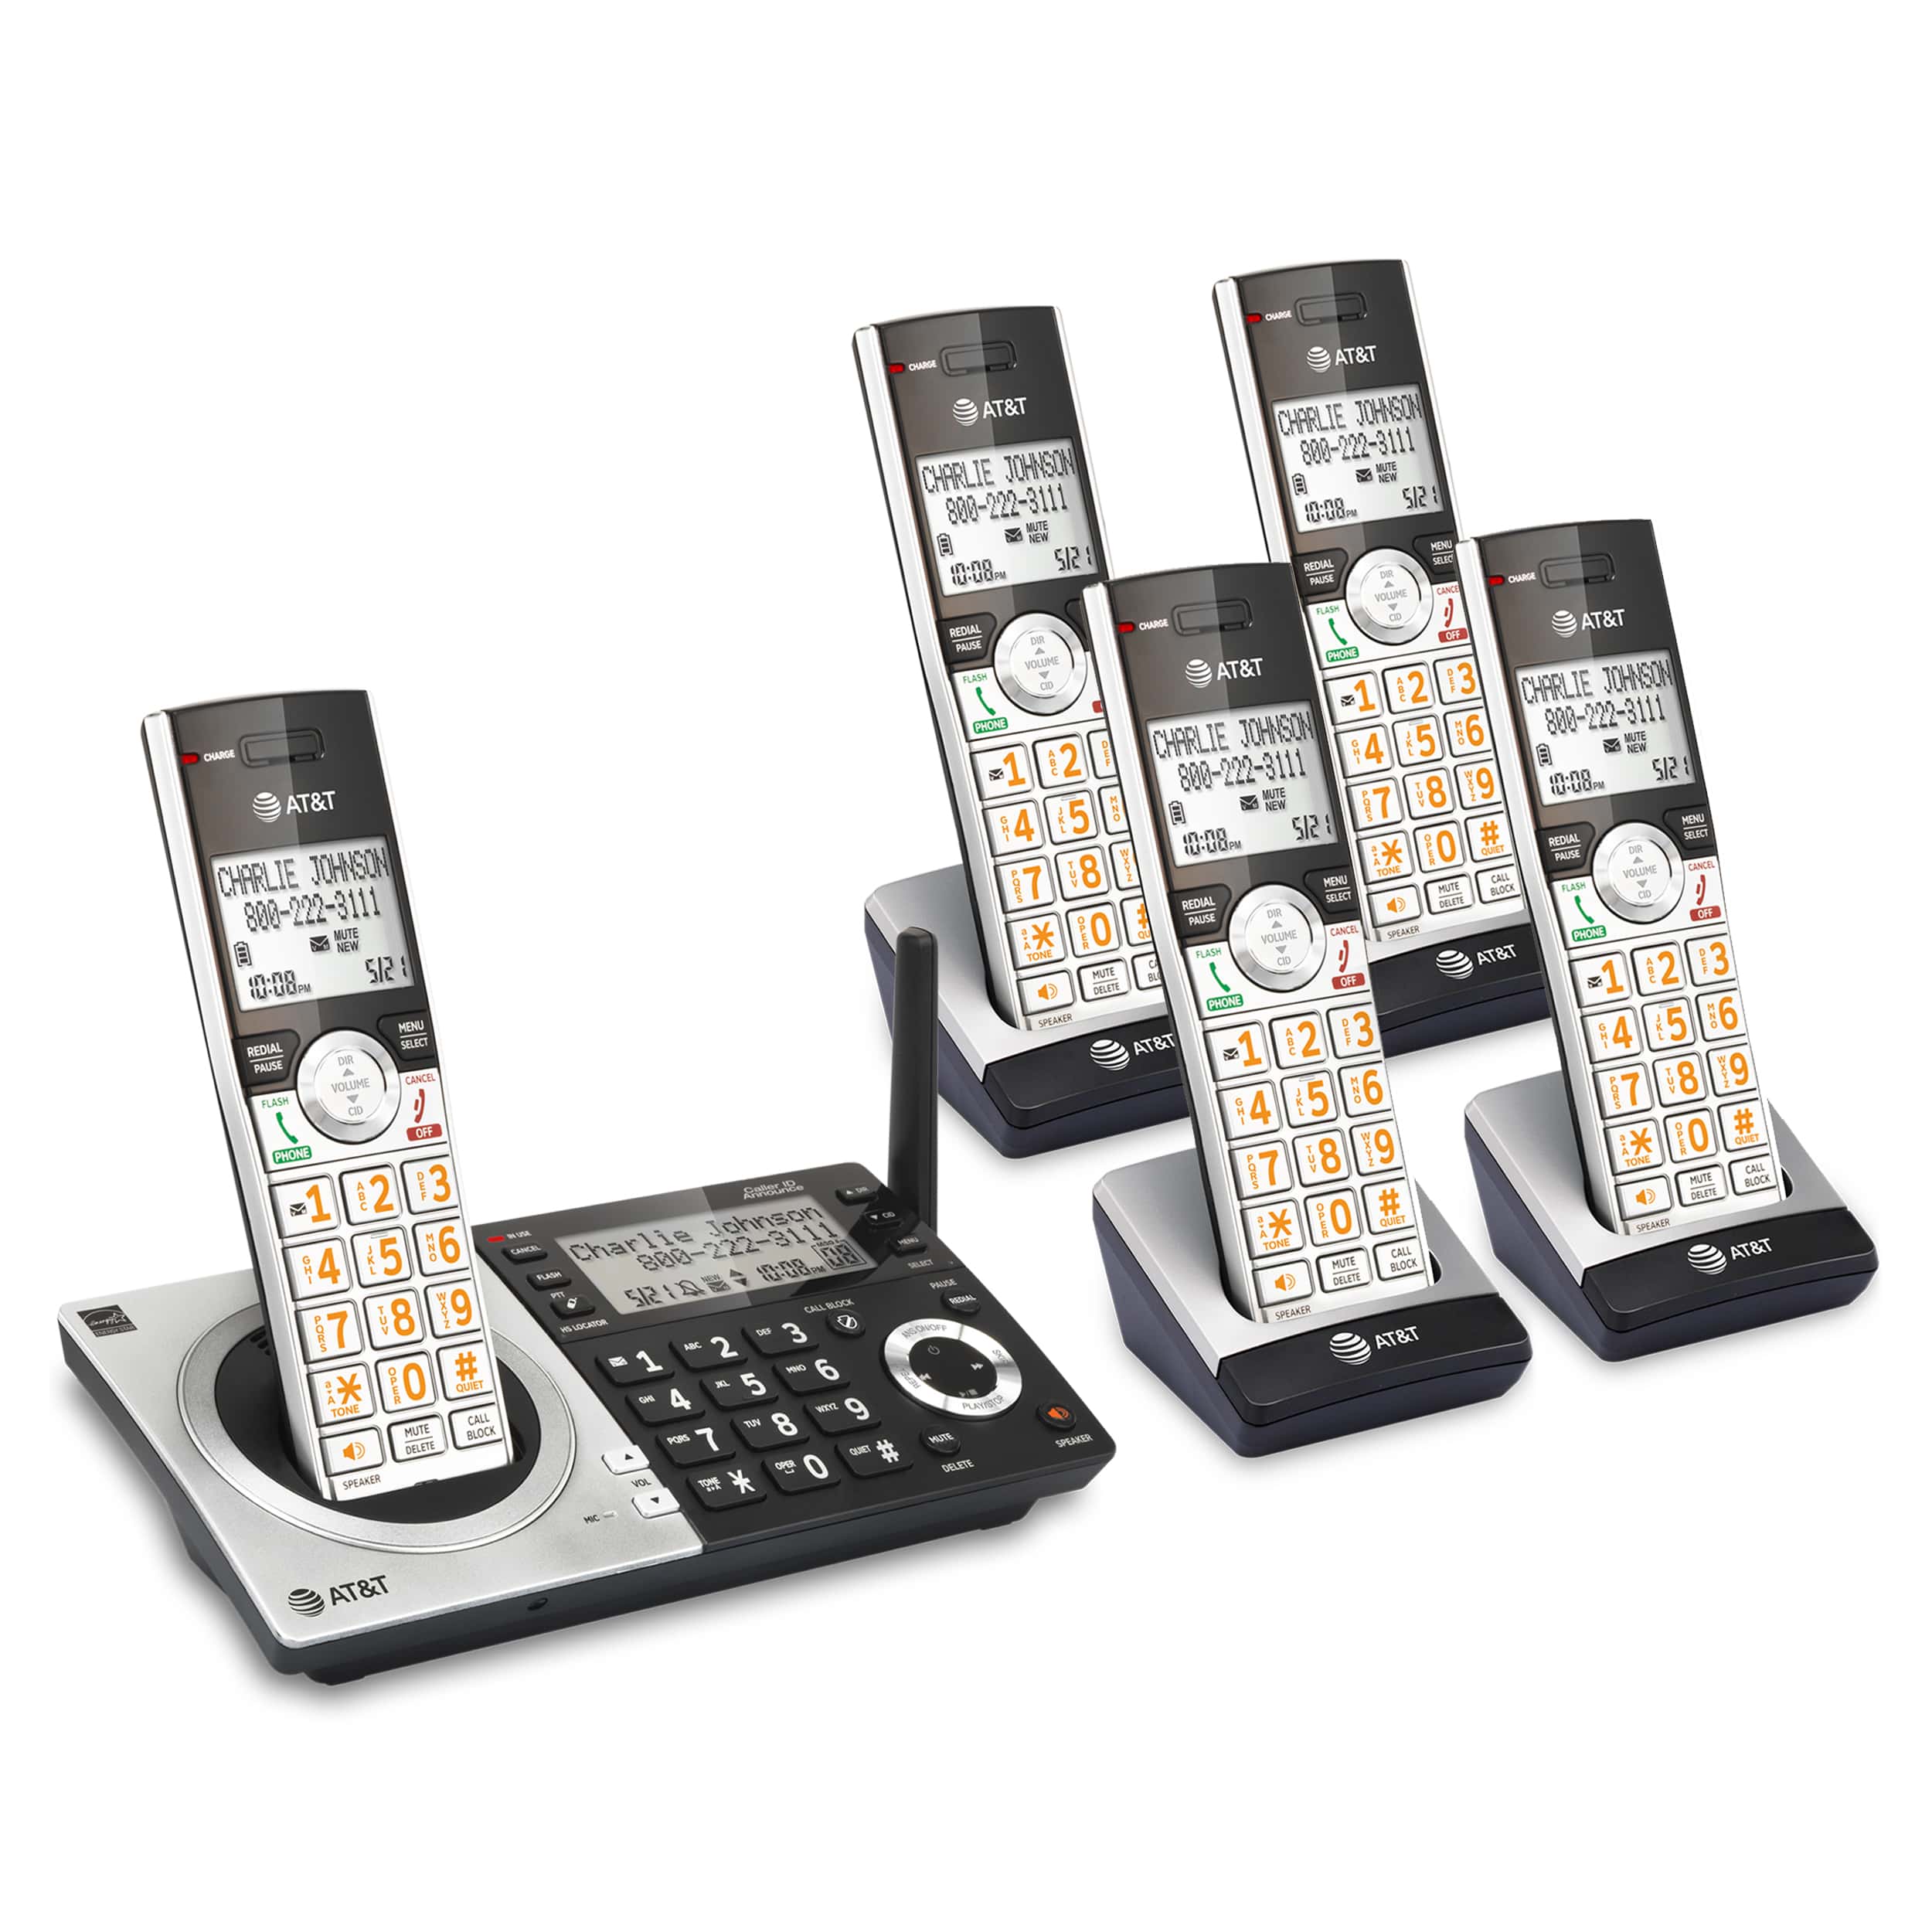 5-Handset Expandable Cordless Phone with Unsurpassed Range, Smart Call Blocker and Answering System - view 3